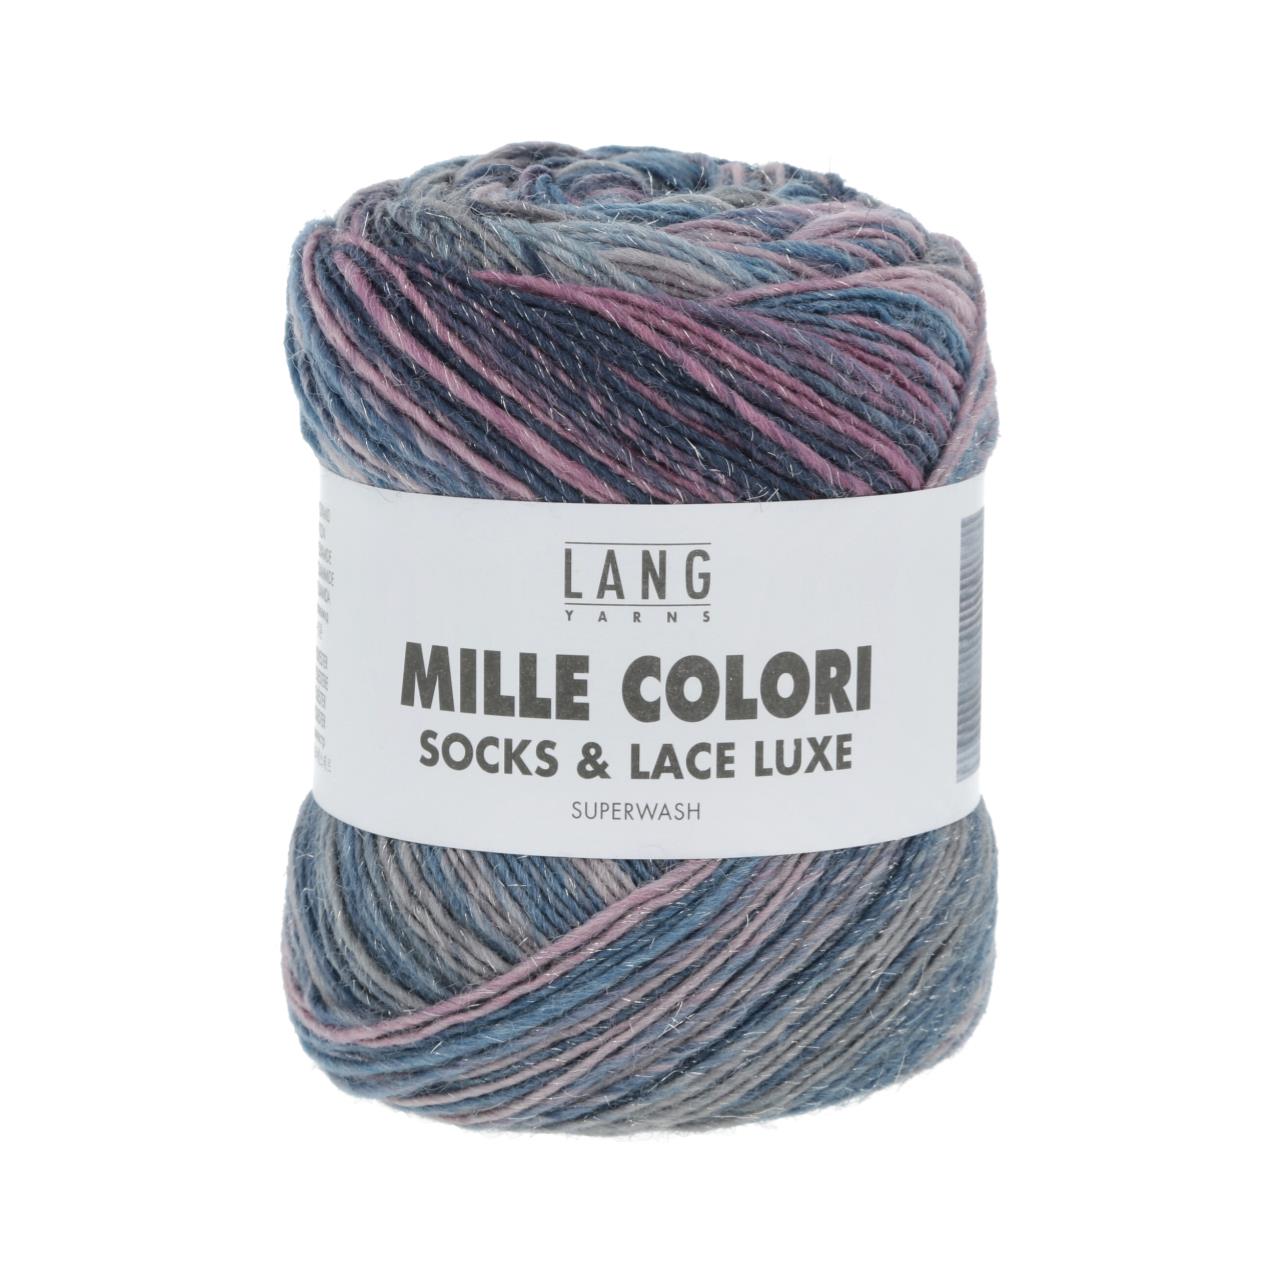 Mille Colori Socks & Lace Luxe 202 Jeans